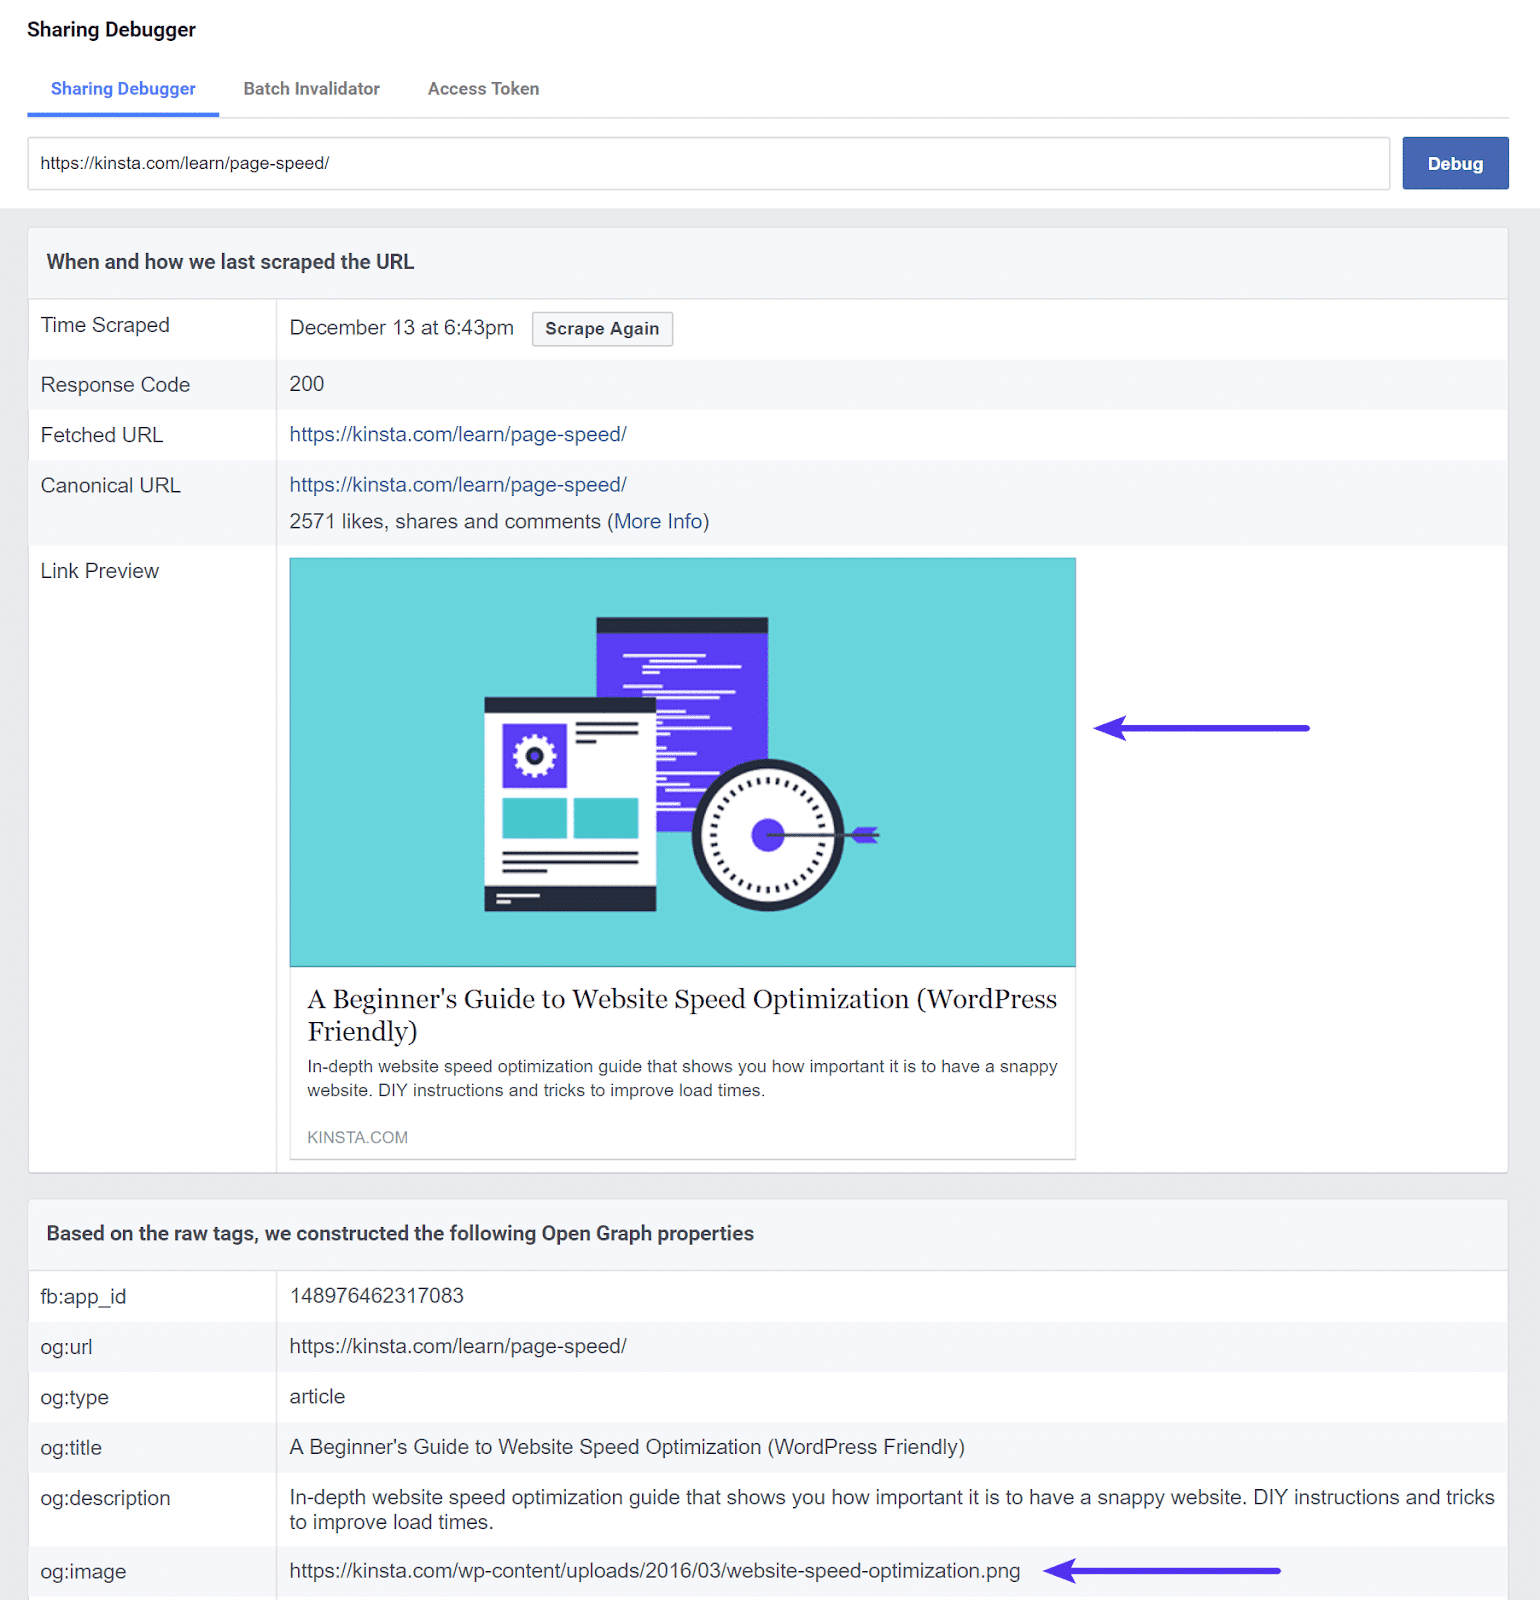 Old image and URL showing in Sharing Debugger